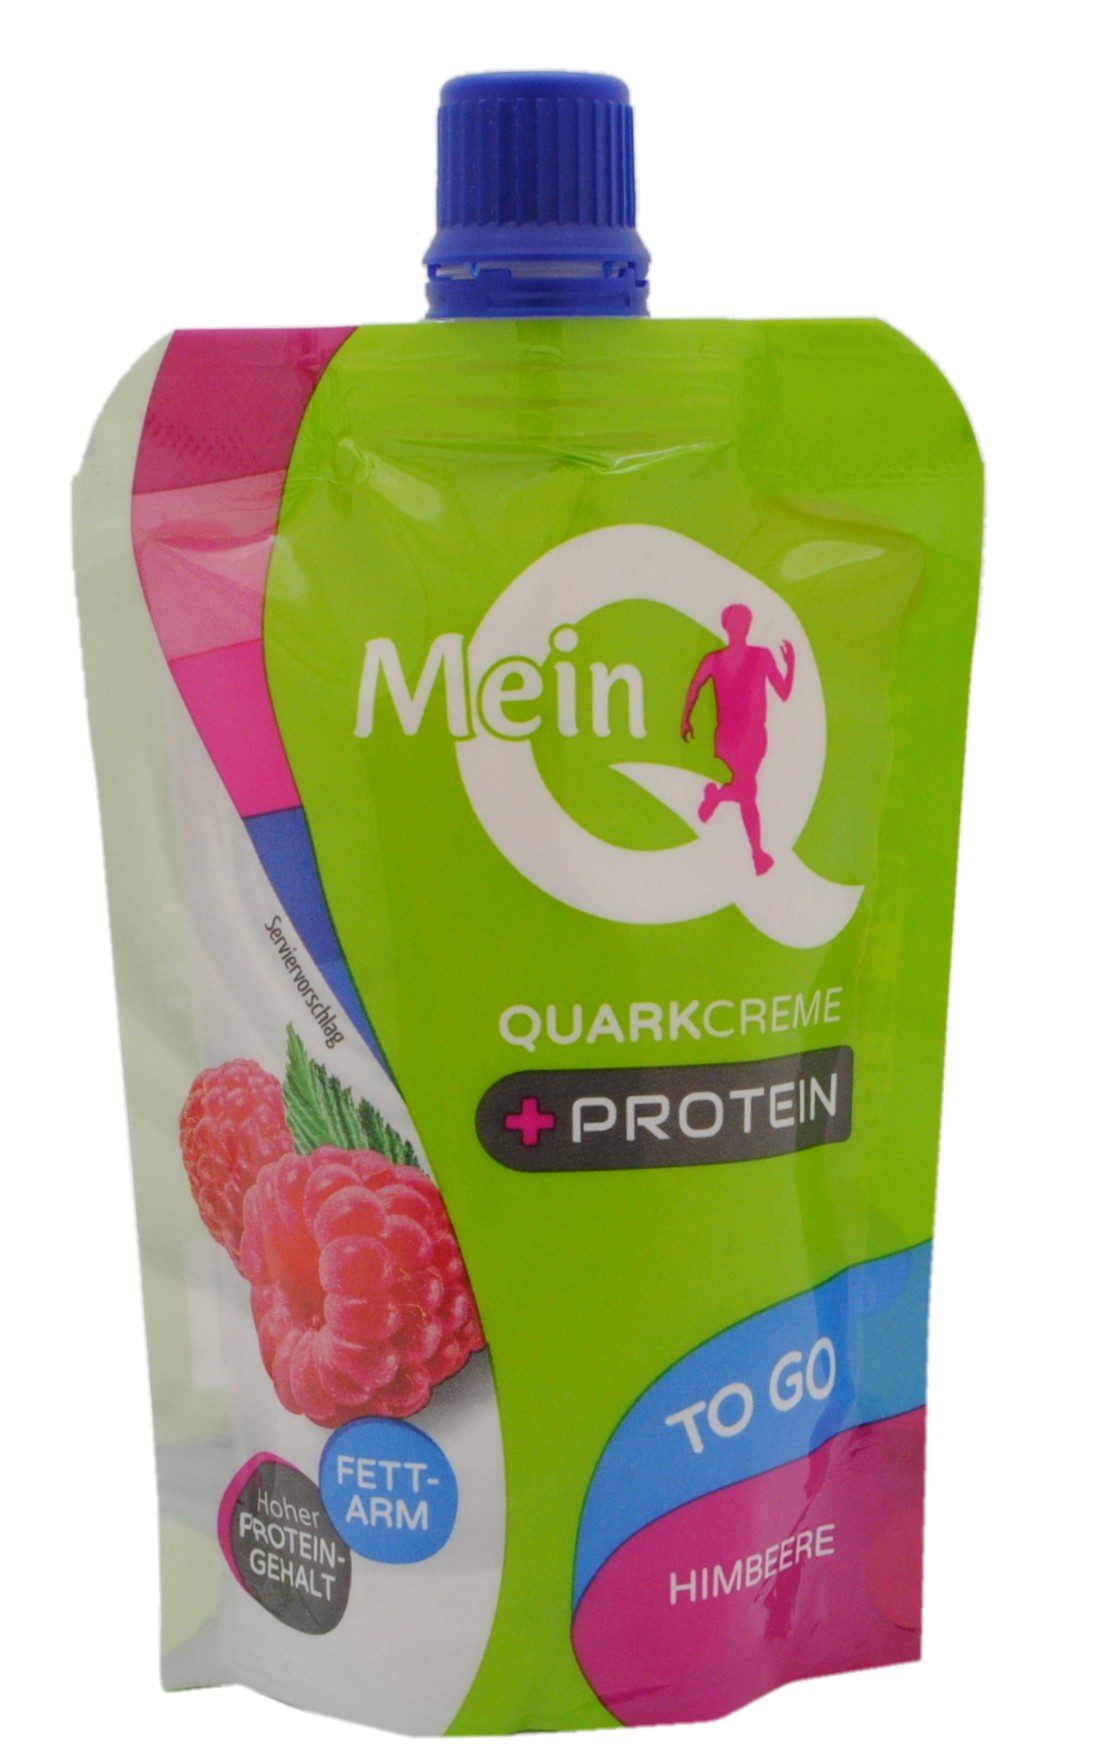 Raspberry Flavoured Quark Creme with Protein